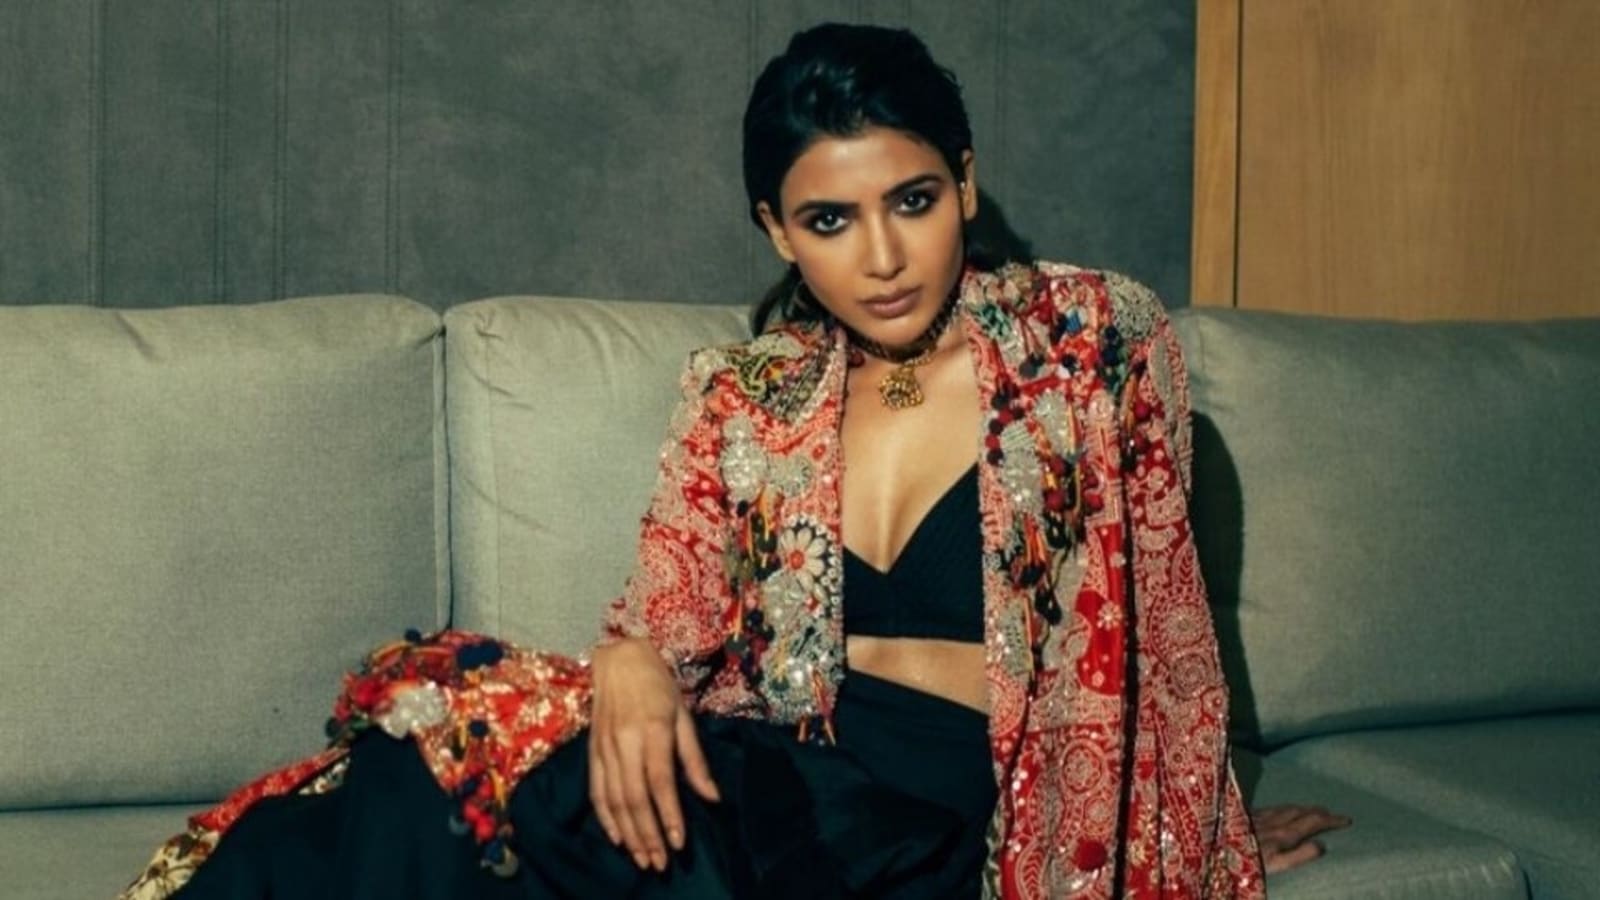 Samantha Ruth Prabhu reacts to person saying they ‘wanna reproduce’ her: ‘Should have googled that first?’